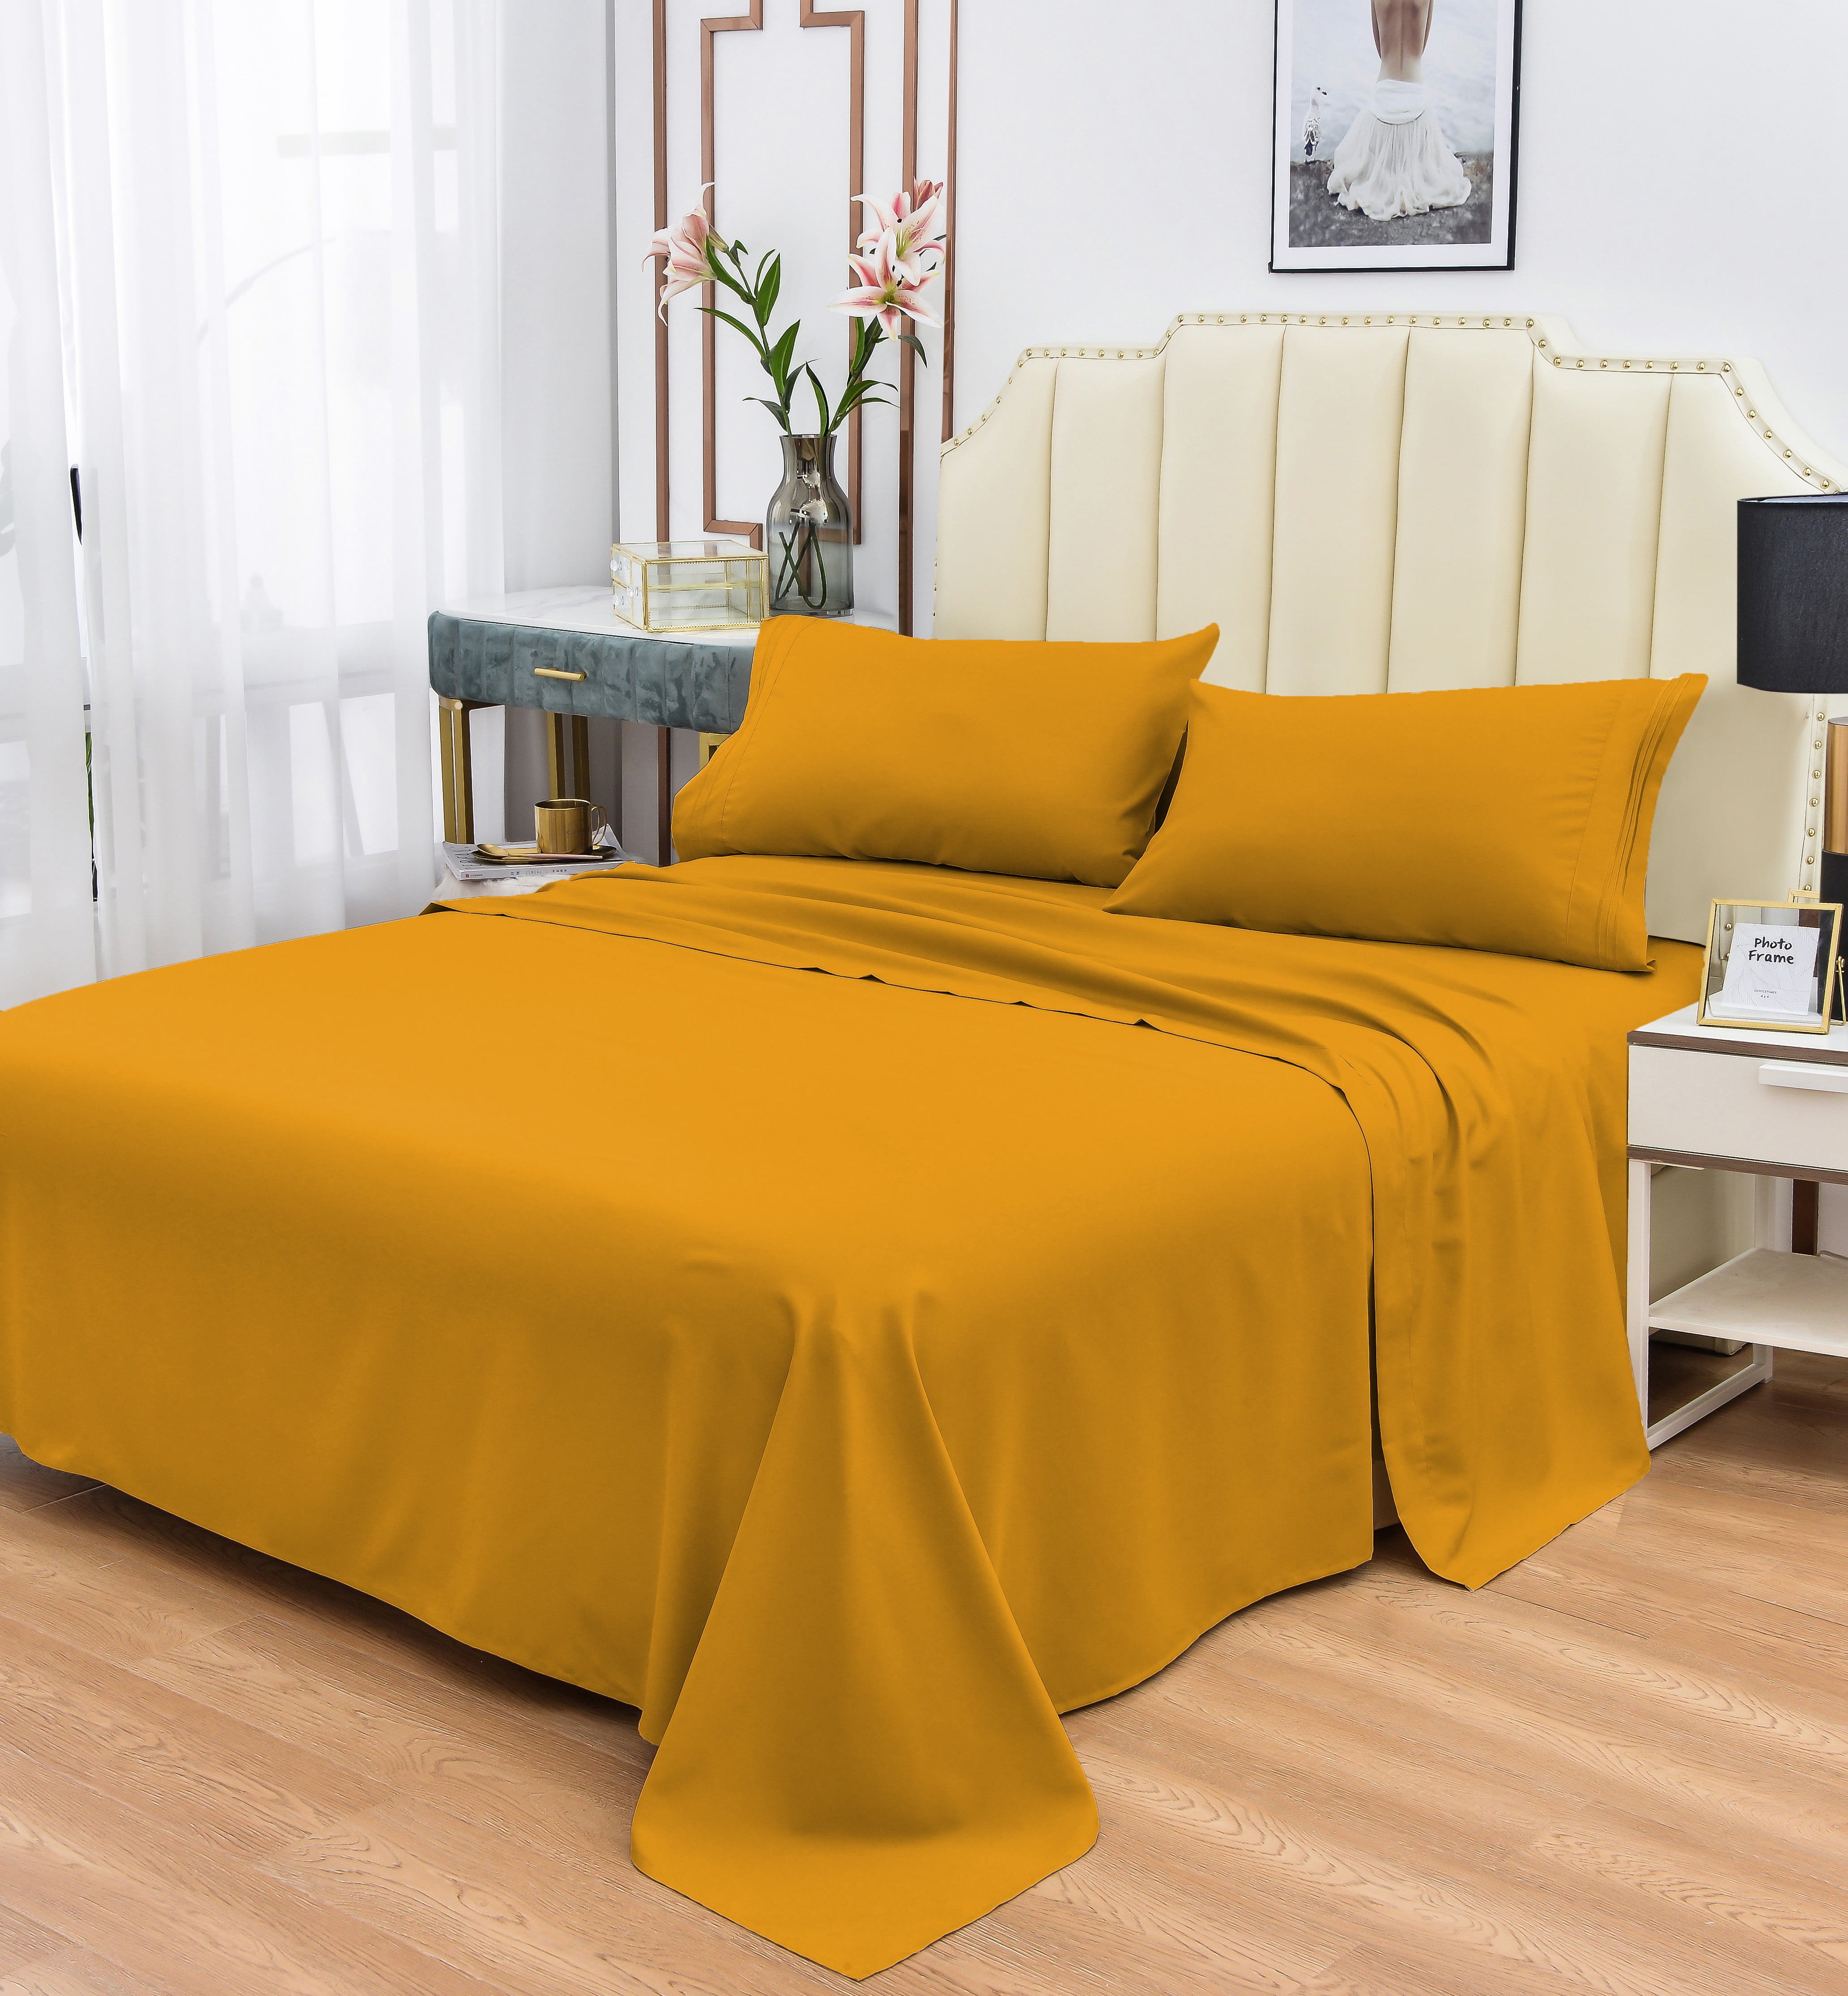 Details about   Cozy Bedding Flat Sheet+2 Pillow Case Egyptian Cotton US Queen Size Solid Colors 